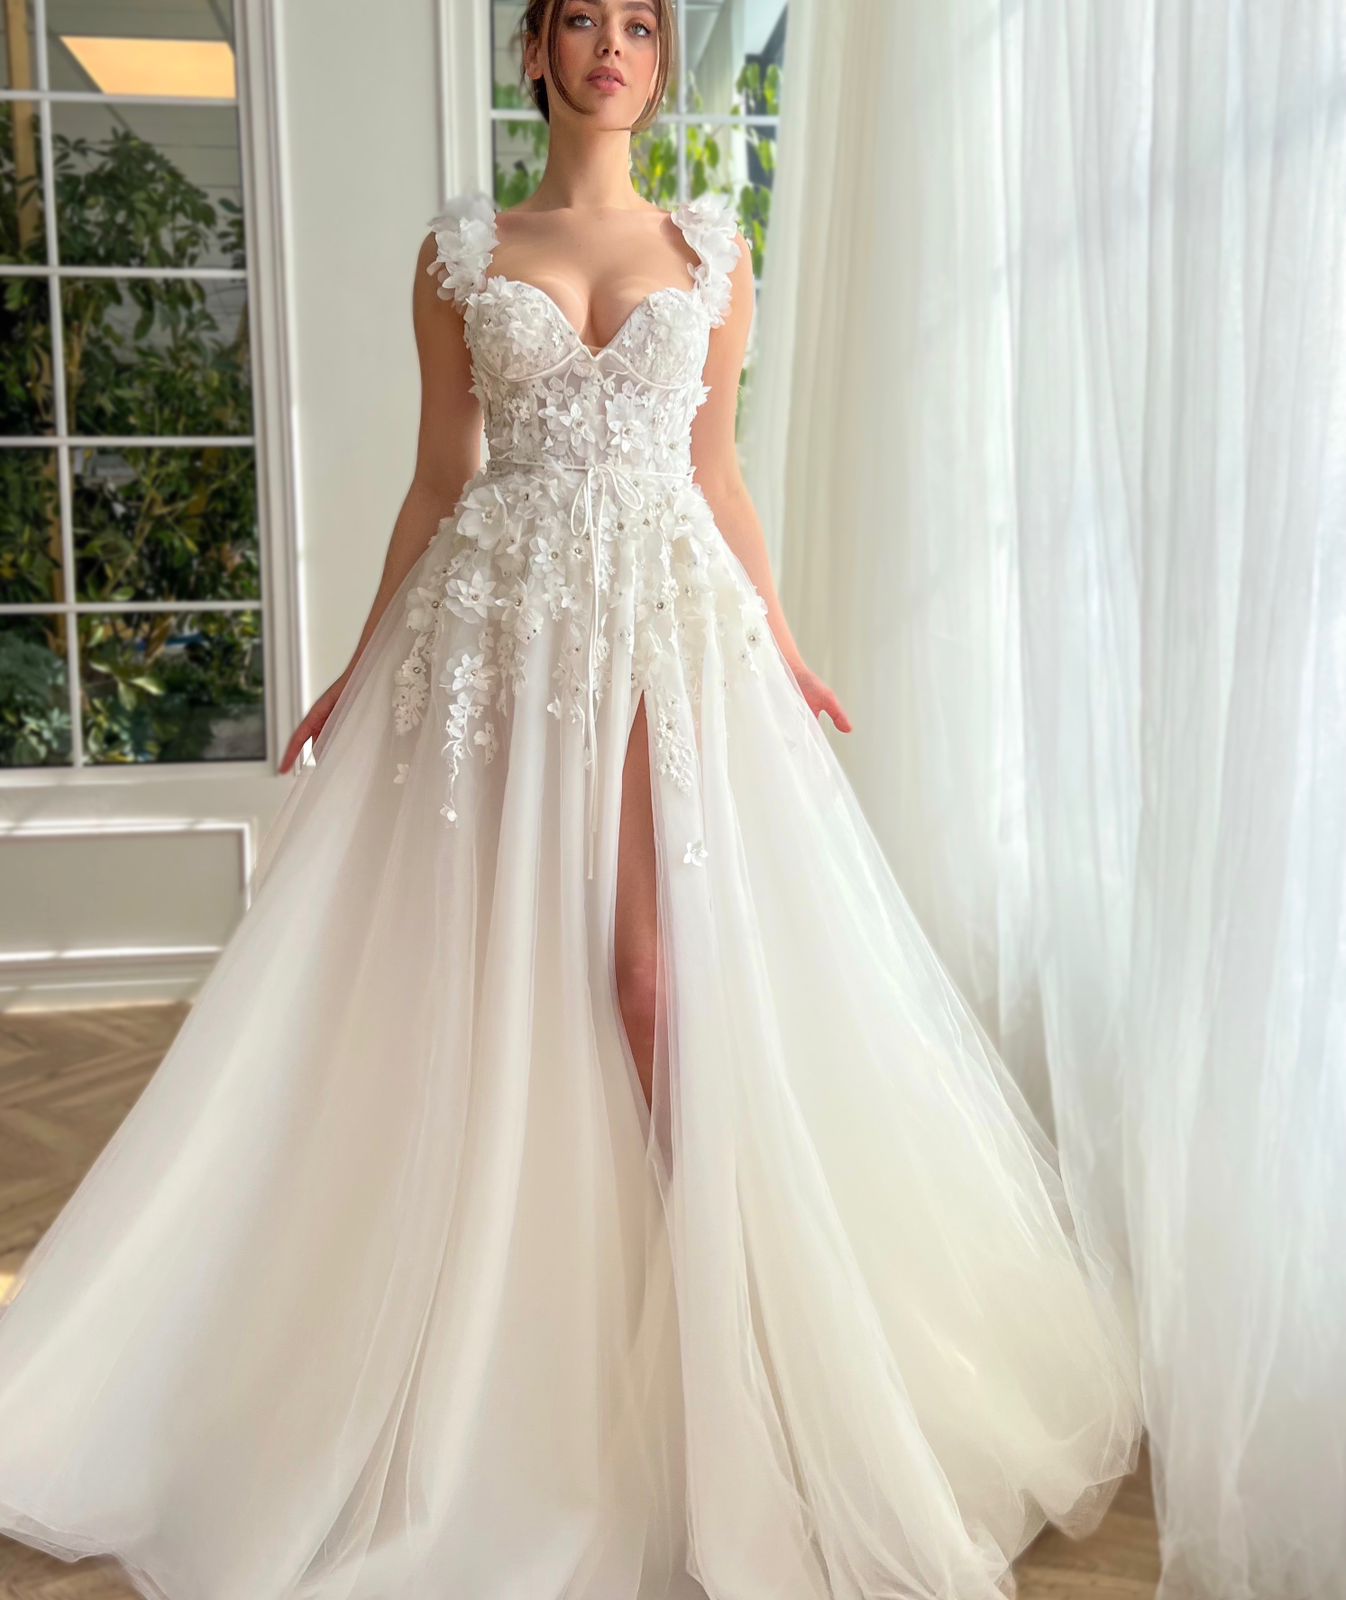 The Belle Wedding Gowns | The Bridal Collection in Denver